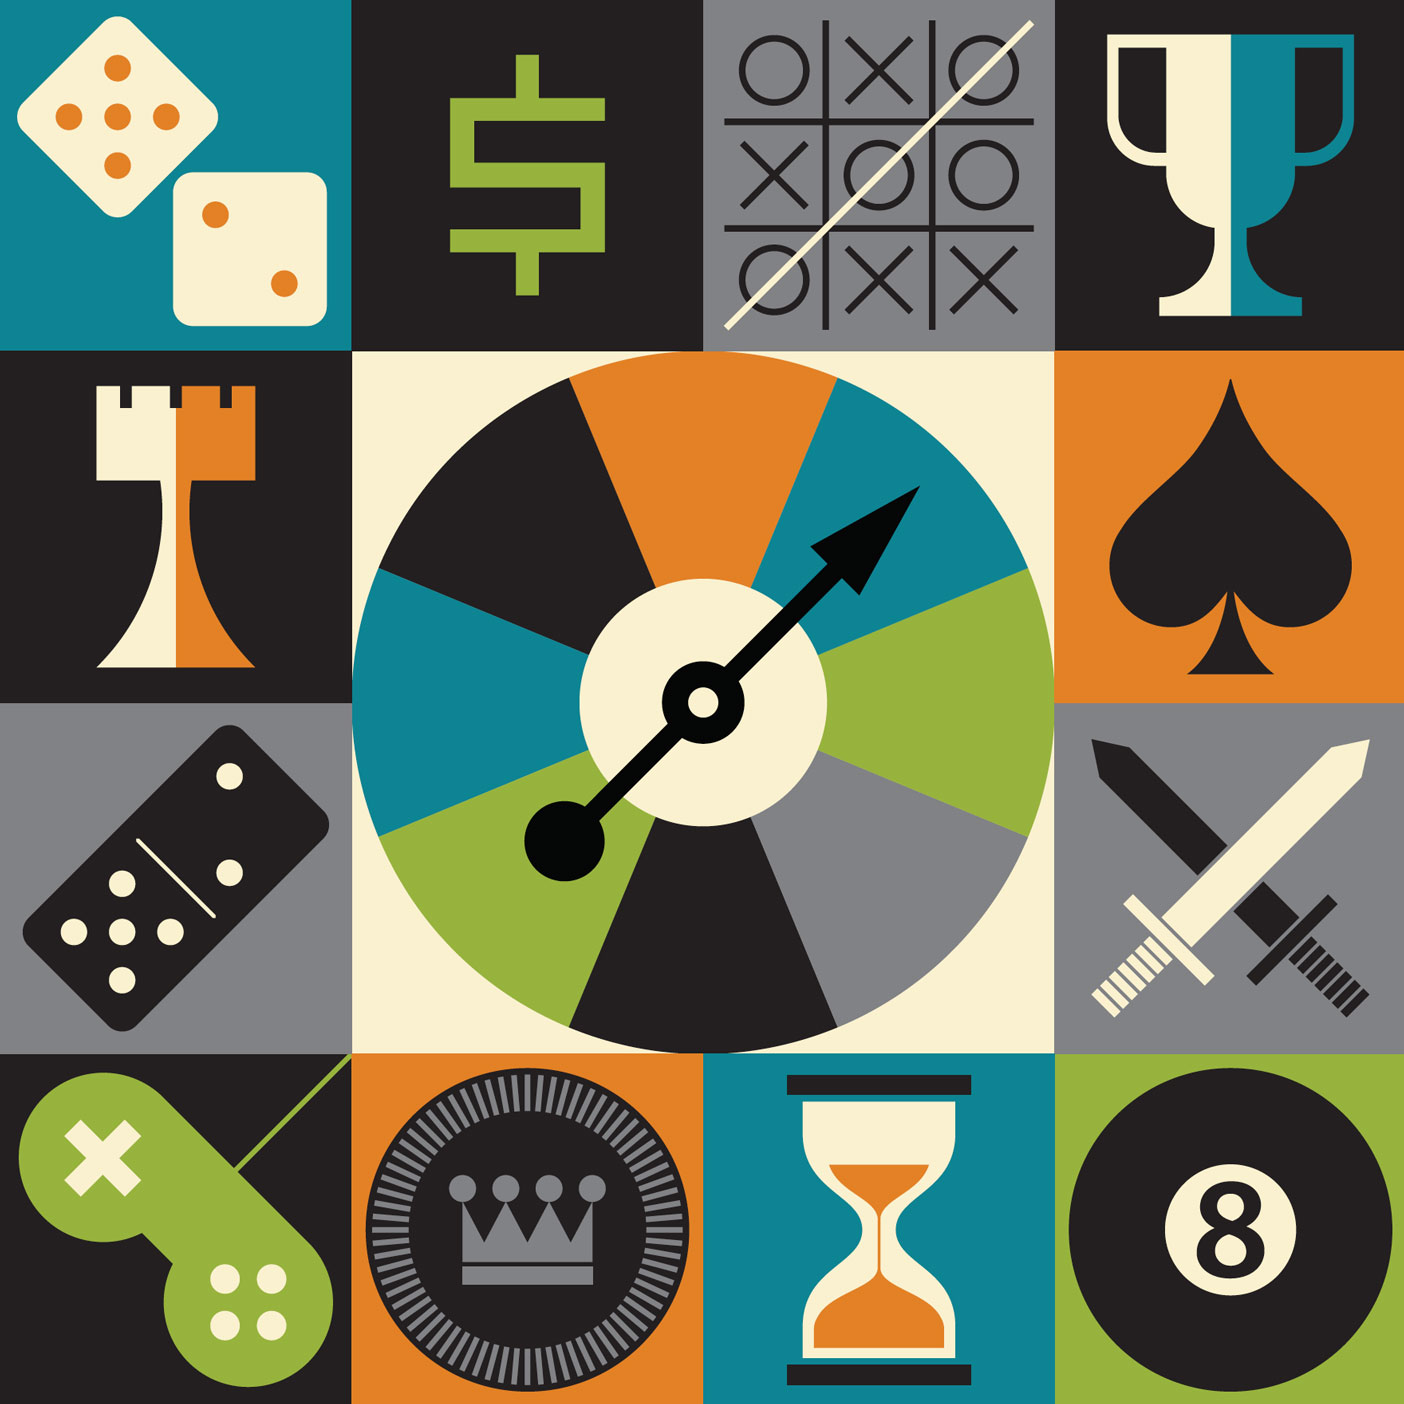 Illustration depicting games from dice to dominoes to tic-tac-toe